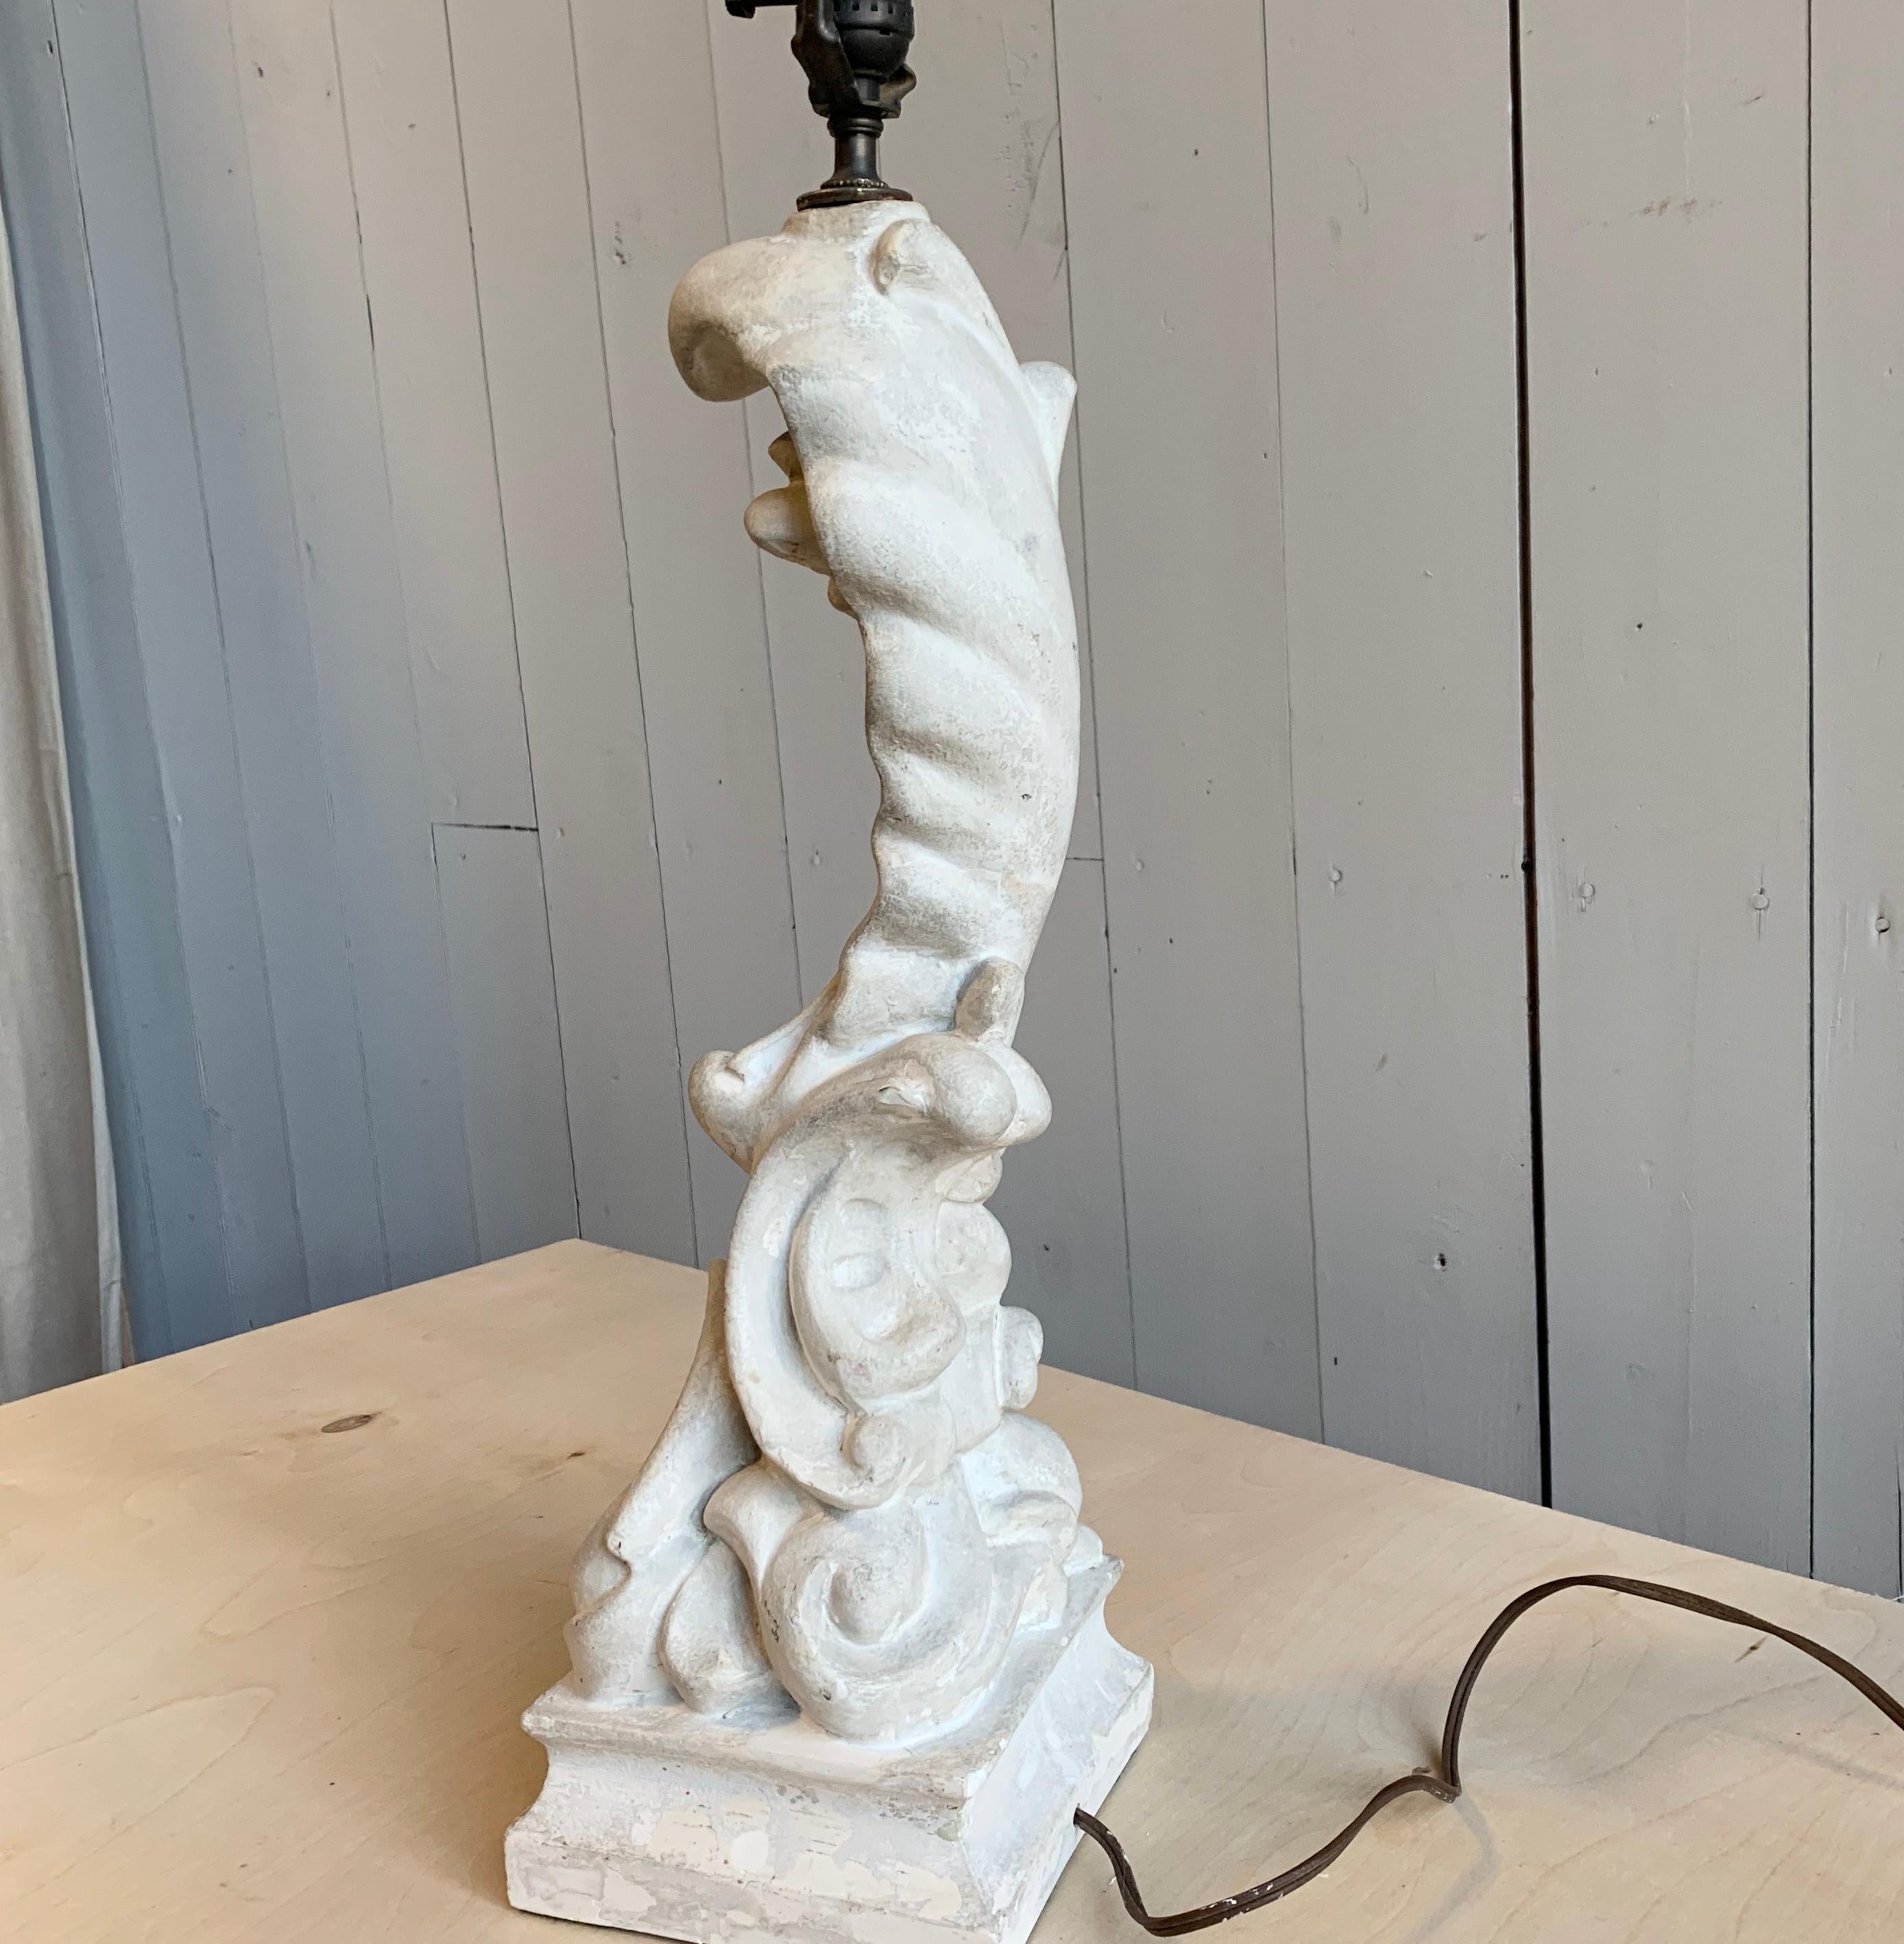 French Table Lamp in Plaster, Serge Roche, 1940s For Sale